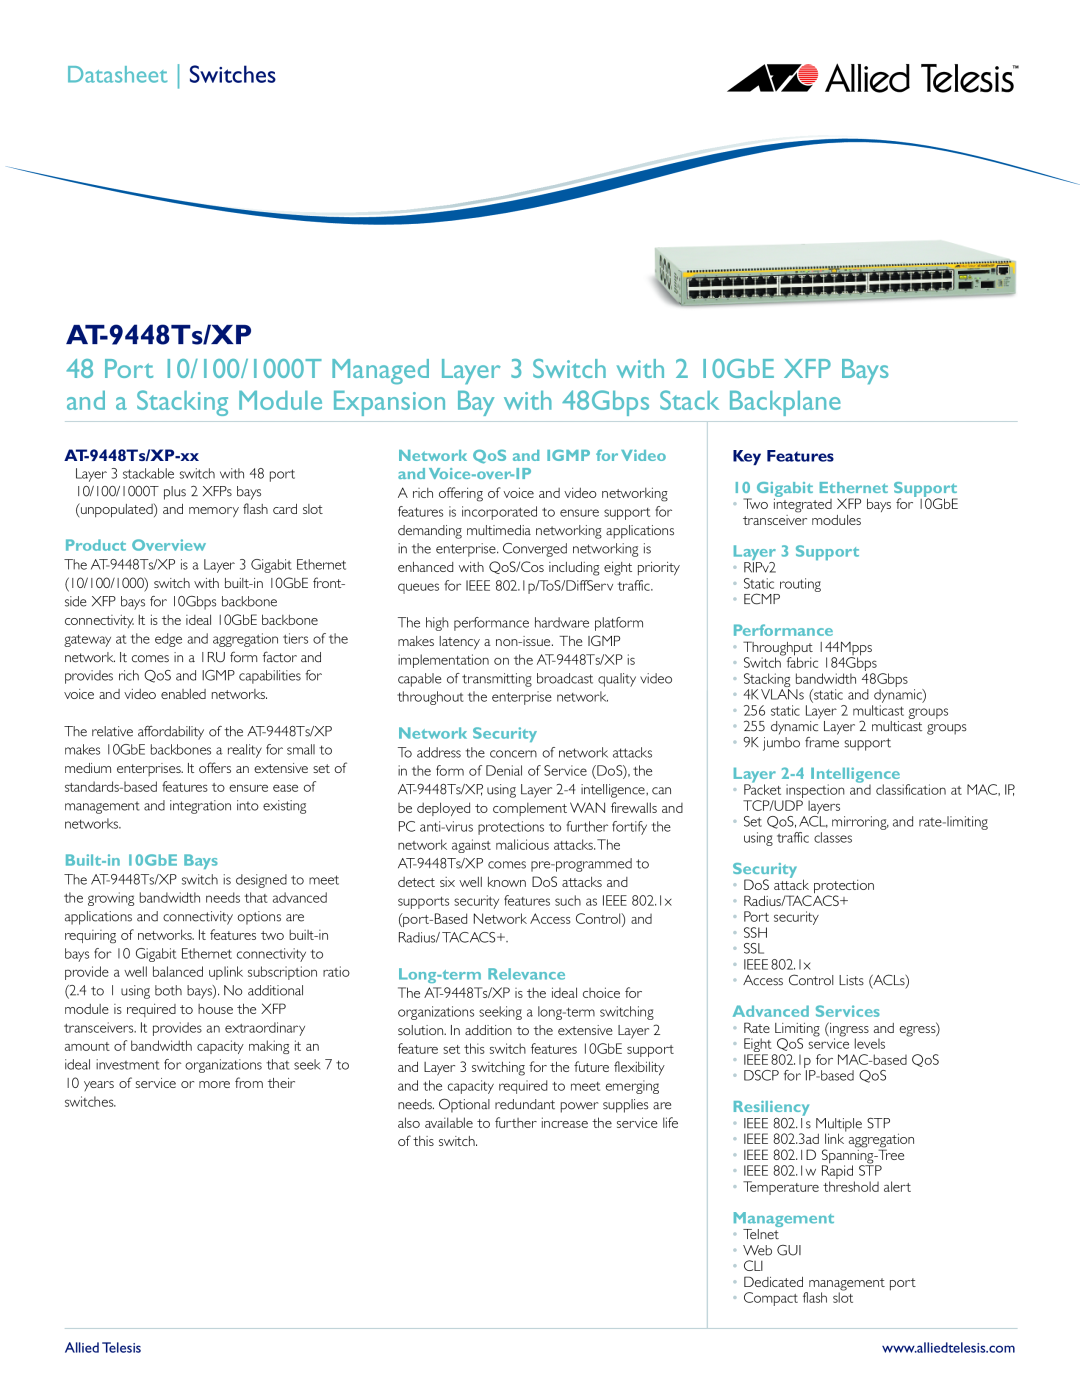 Allied Telesis manual AT-9448Ts/XP-xx, Key Features, Datasheet Switches 